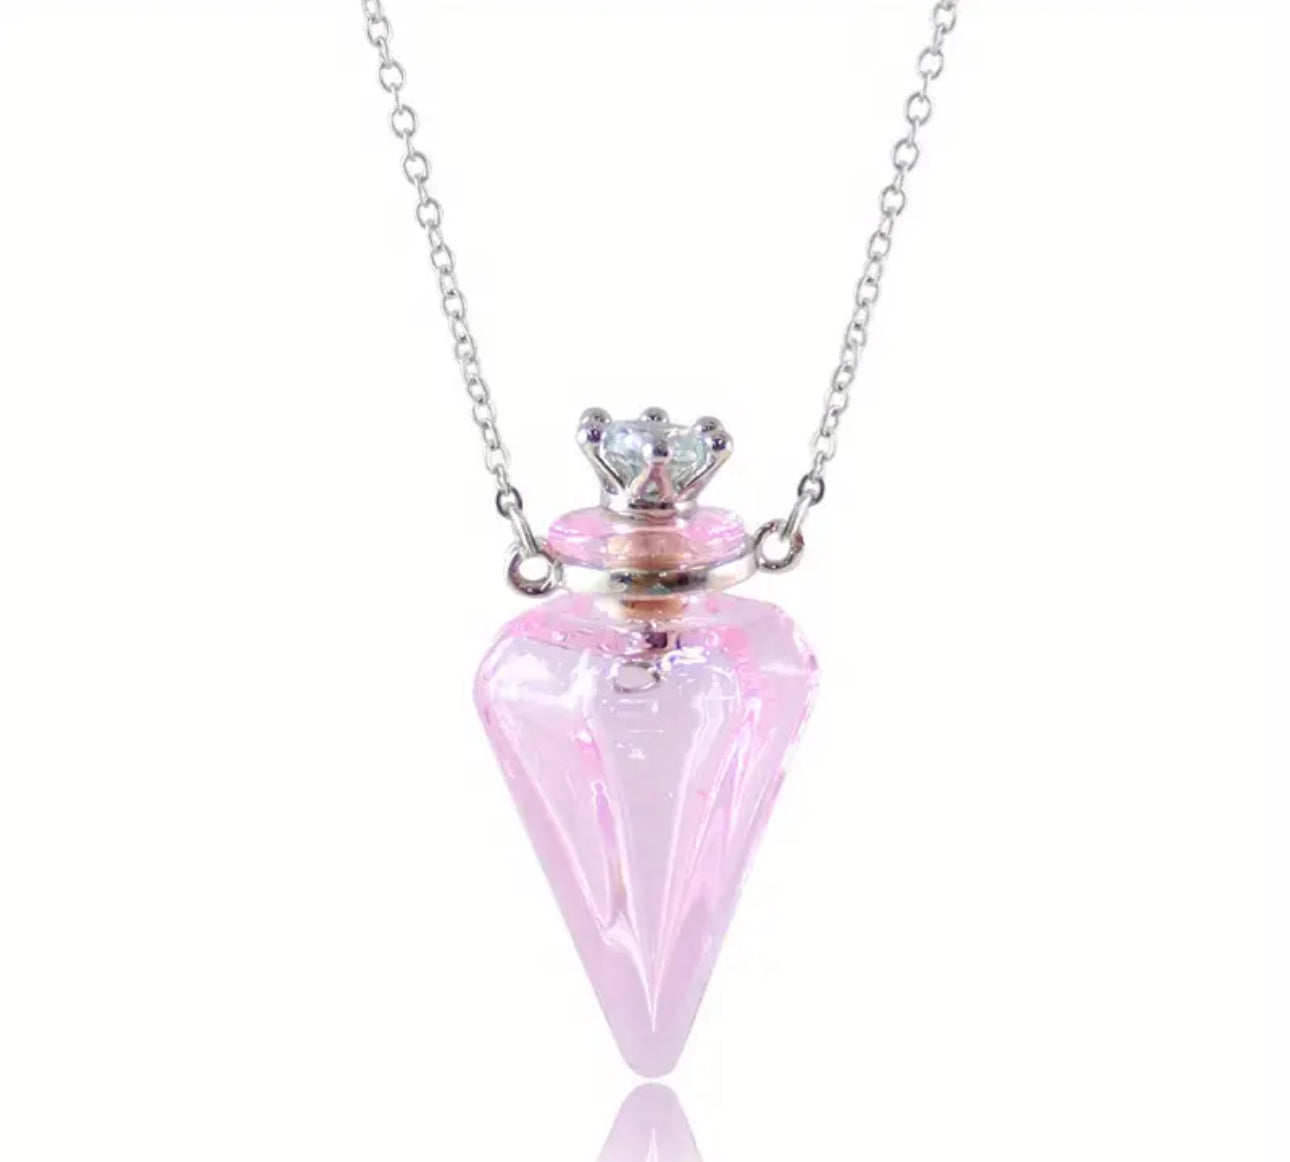 Glass Perfume Bottle / Oil Diffuser Necklace